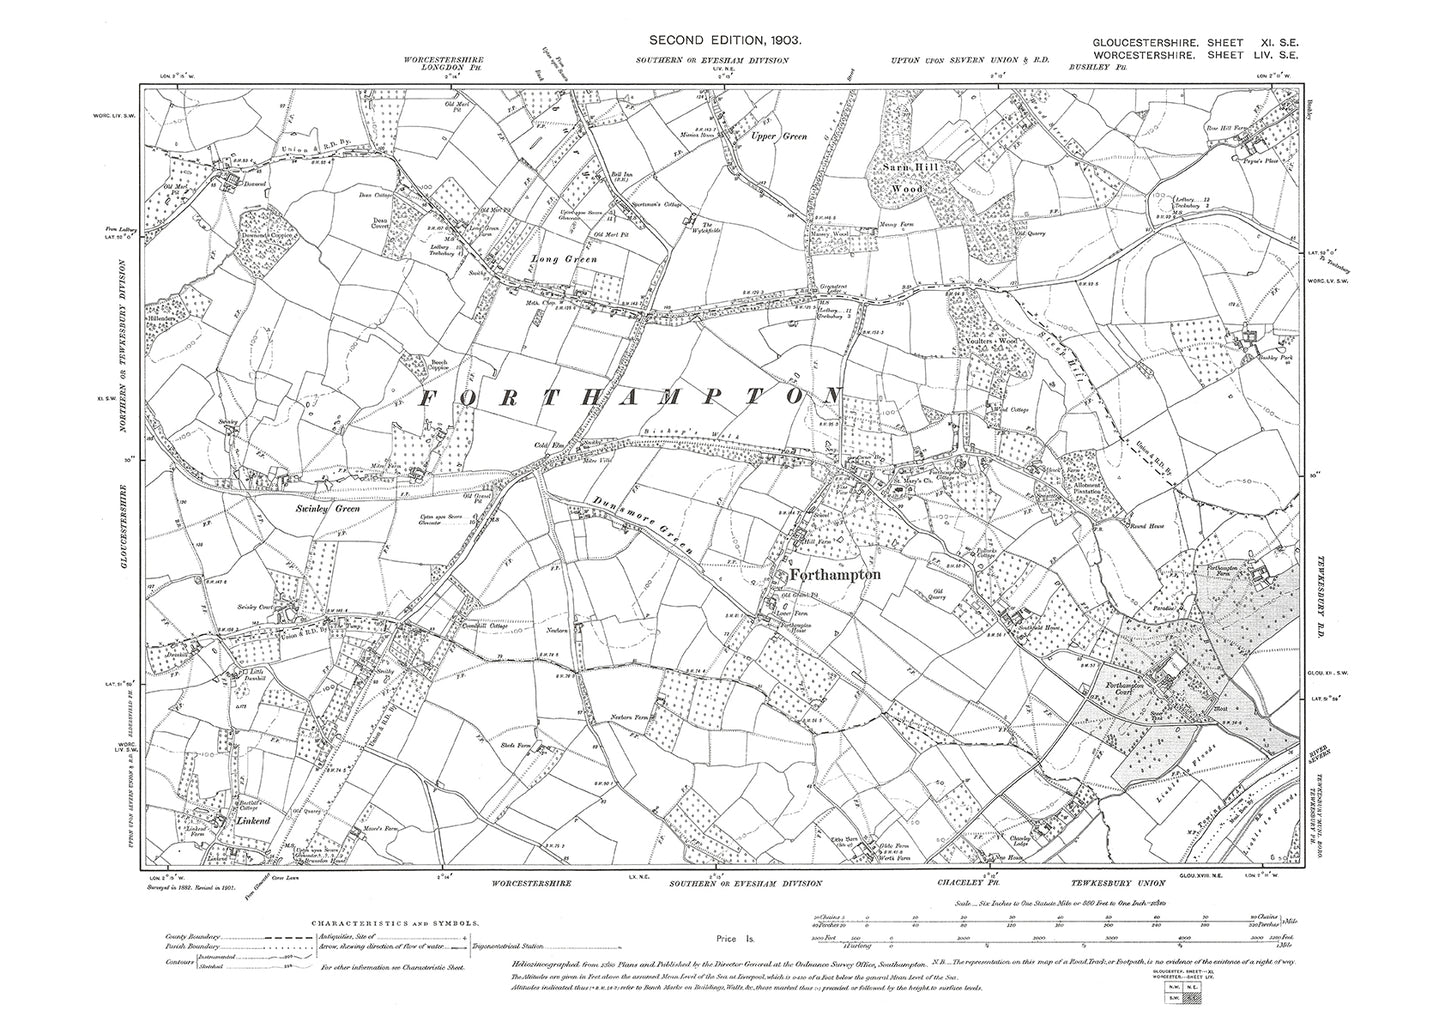 Old OS map dated 1903, showing Forthampton in Gloucestershire - 11SE